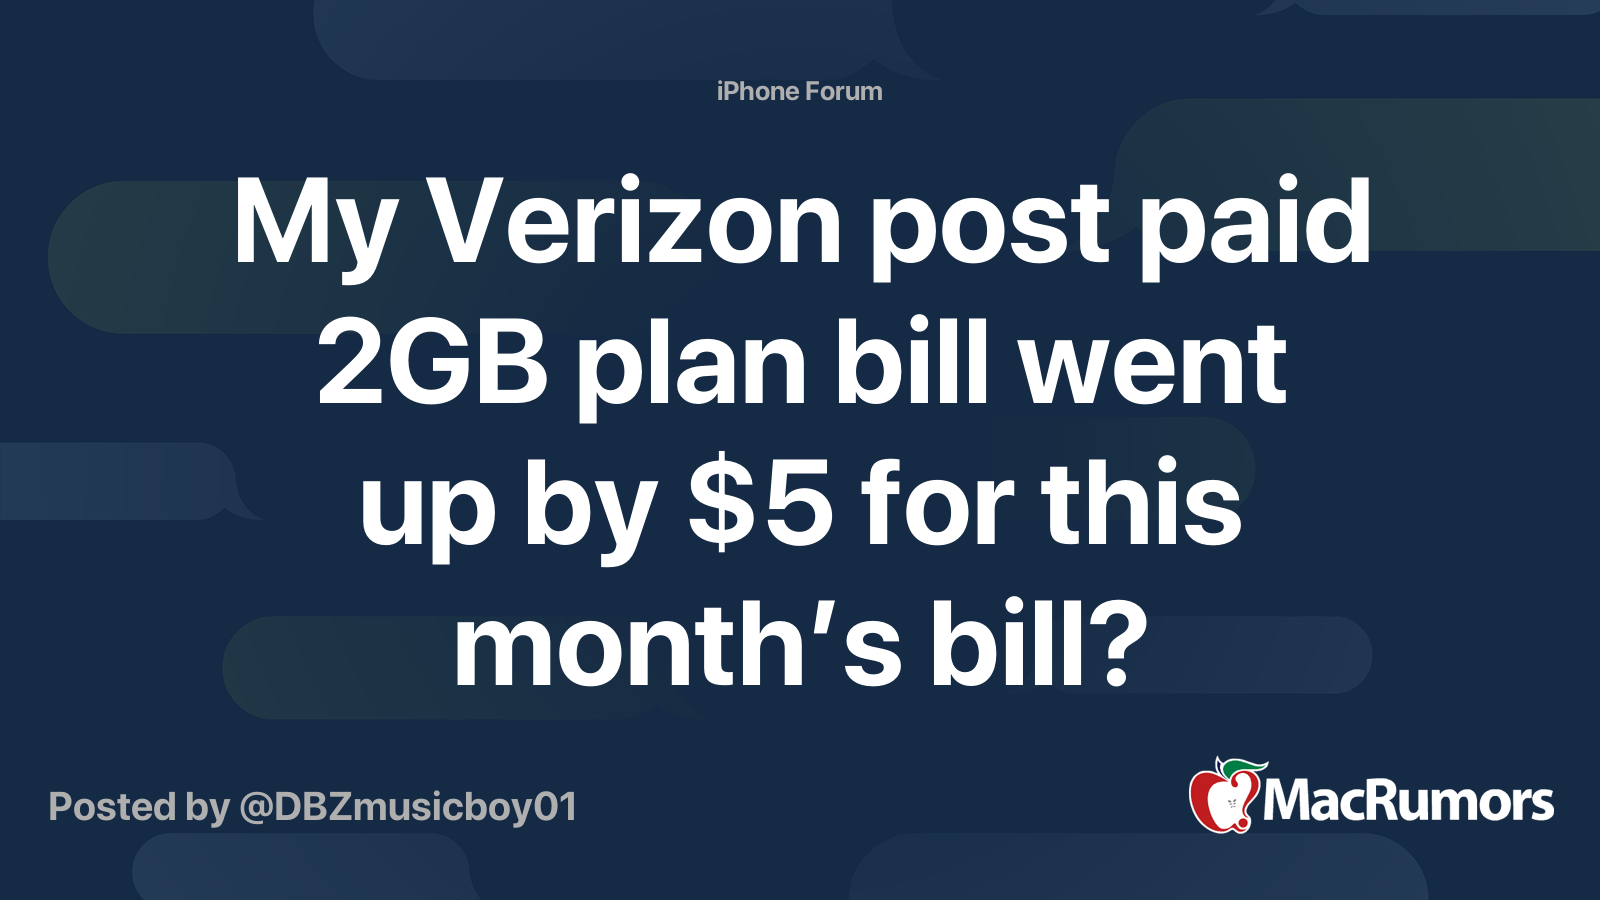 My Verizon post paid 2GB plan bill went up by 5 for this month’s bill